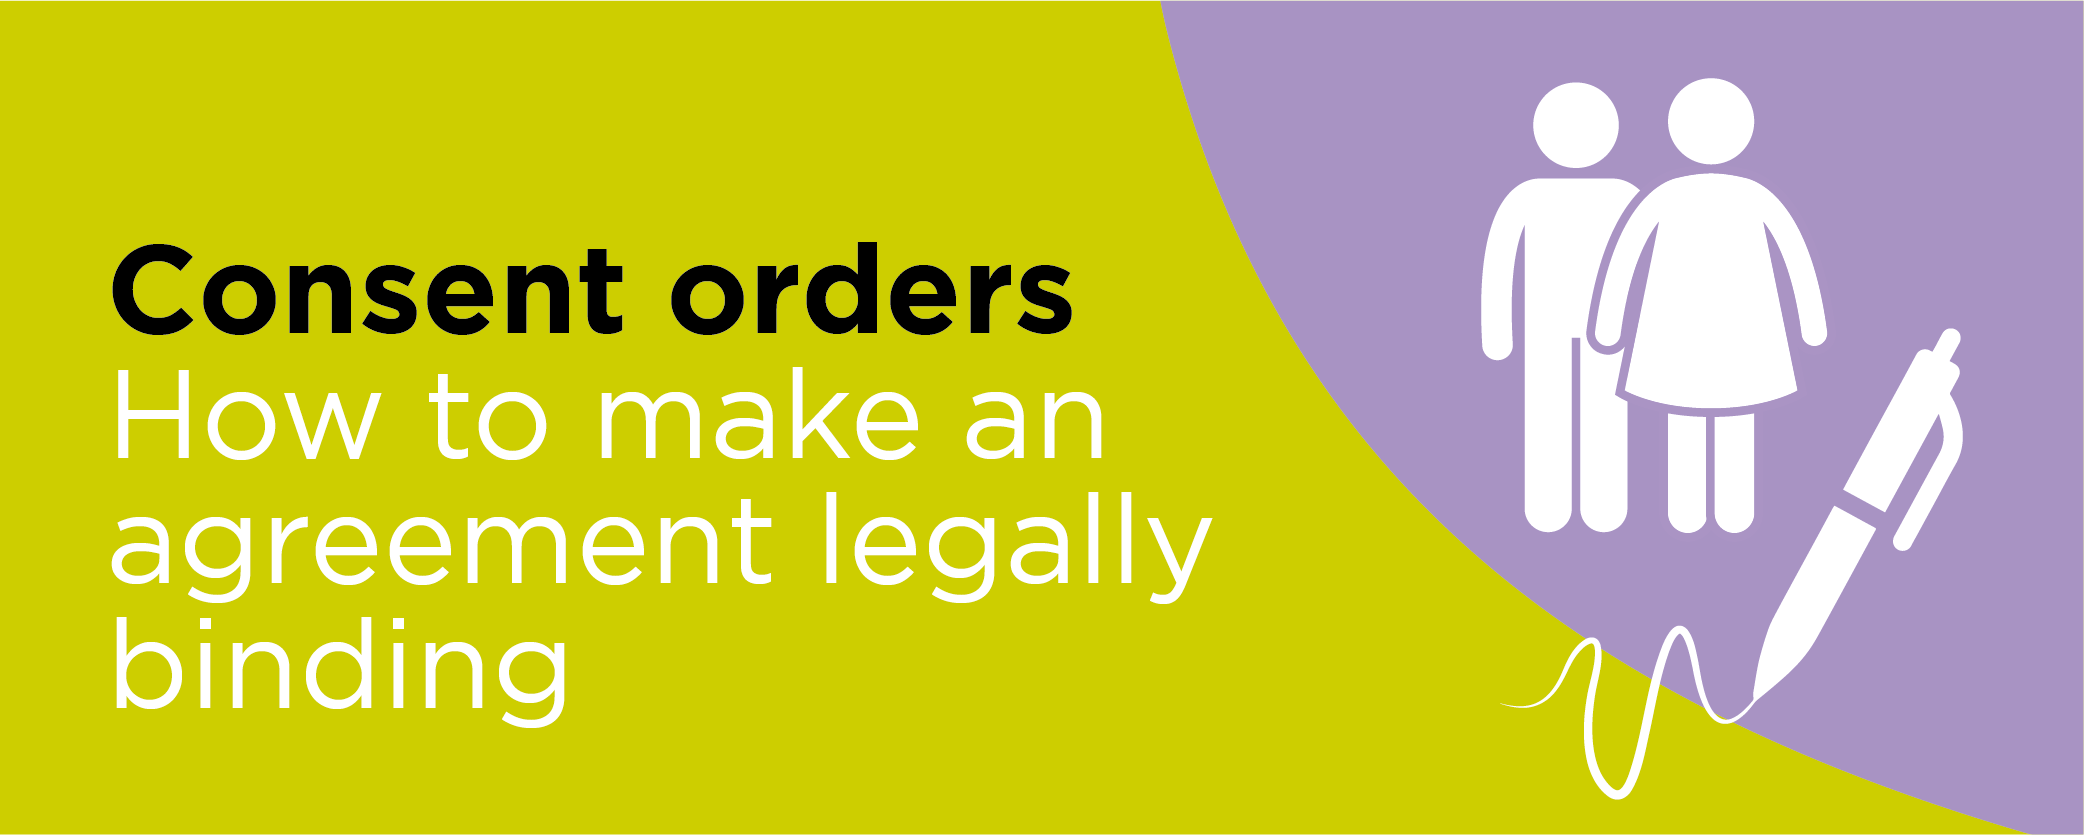 Consent Orders -  how to make an agreement legally binding